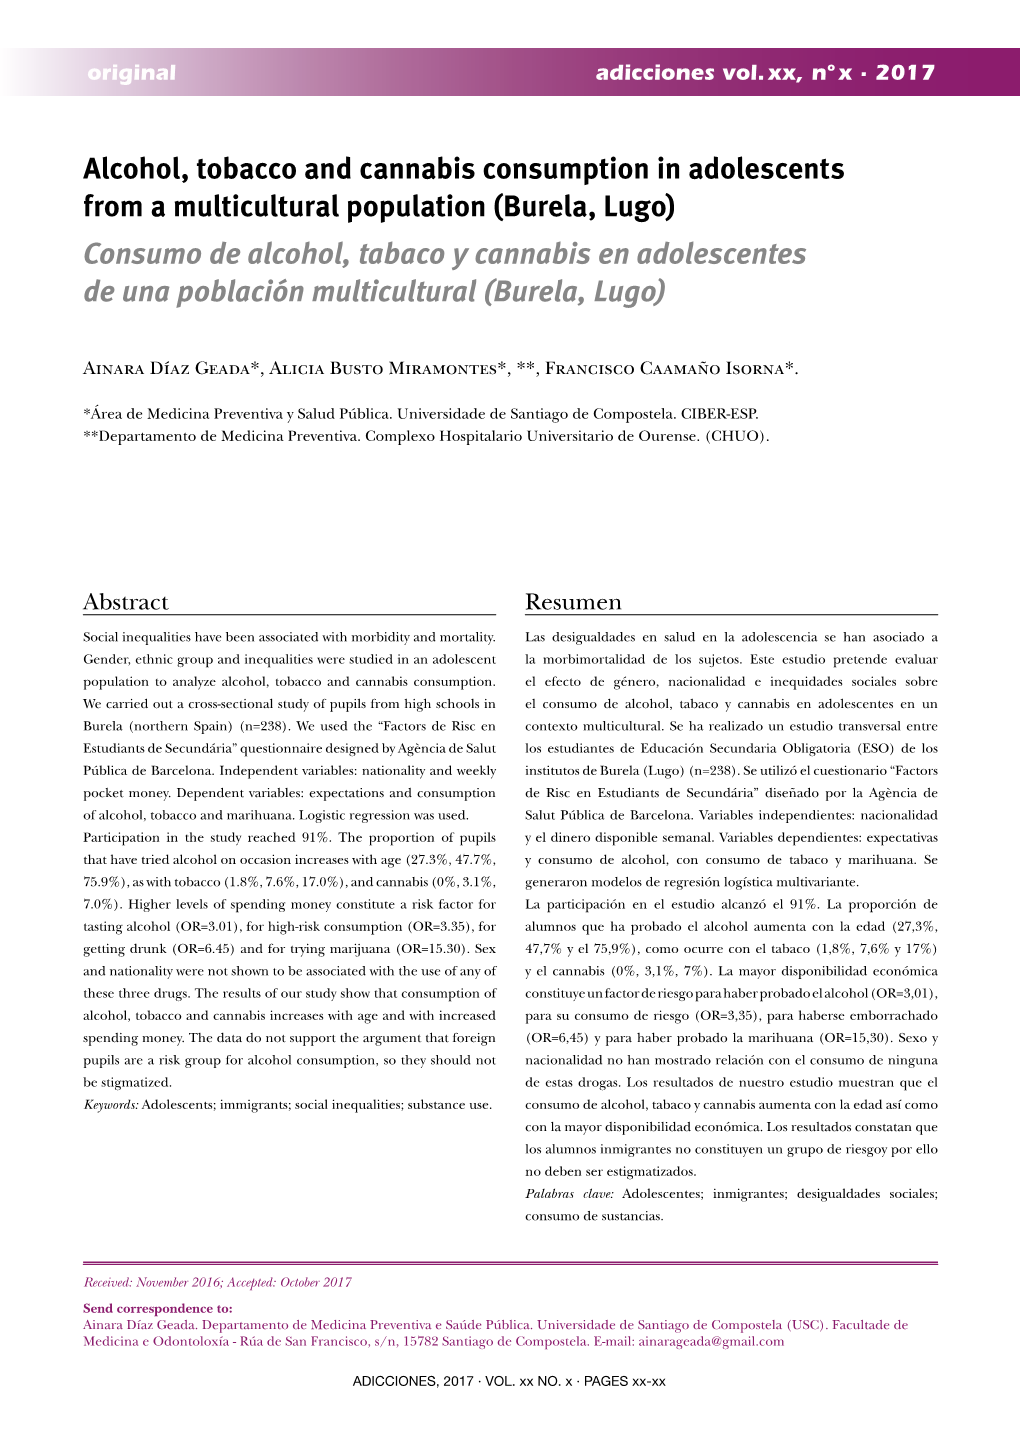 Alcohol, Tobacco and Cannabis Consumption in Adolescents